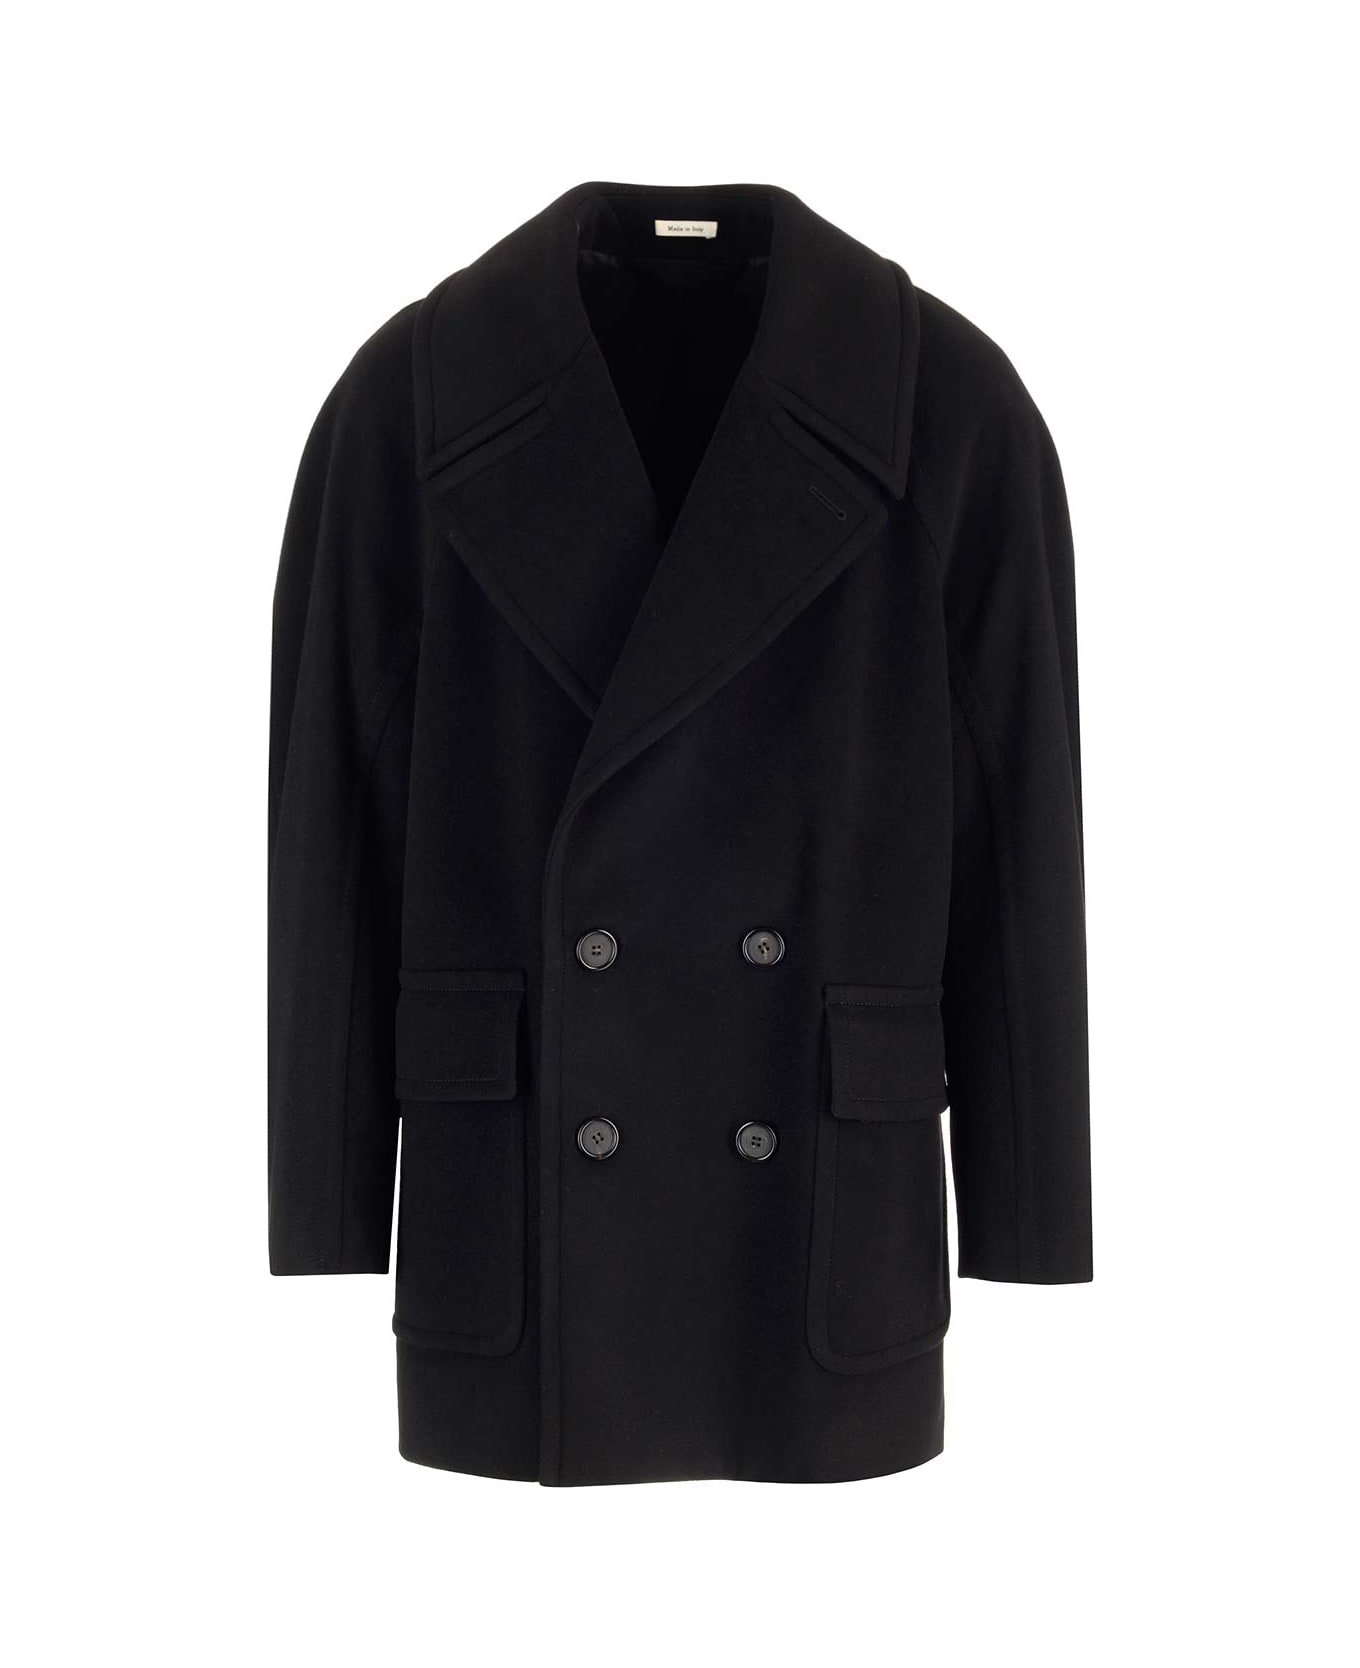 Alexander McQueen Double-breasted Buttoned Blazer - Black コート